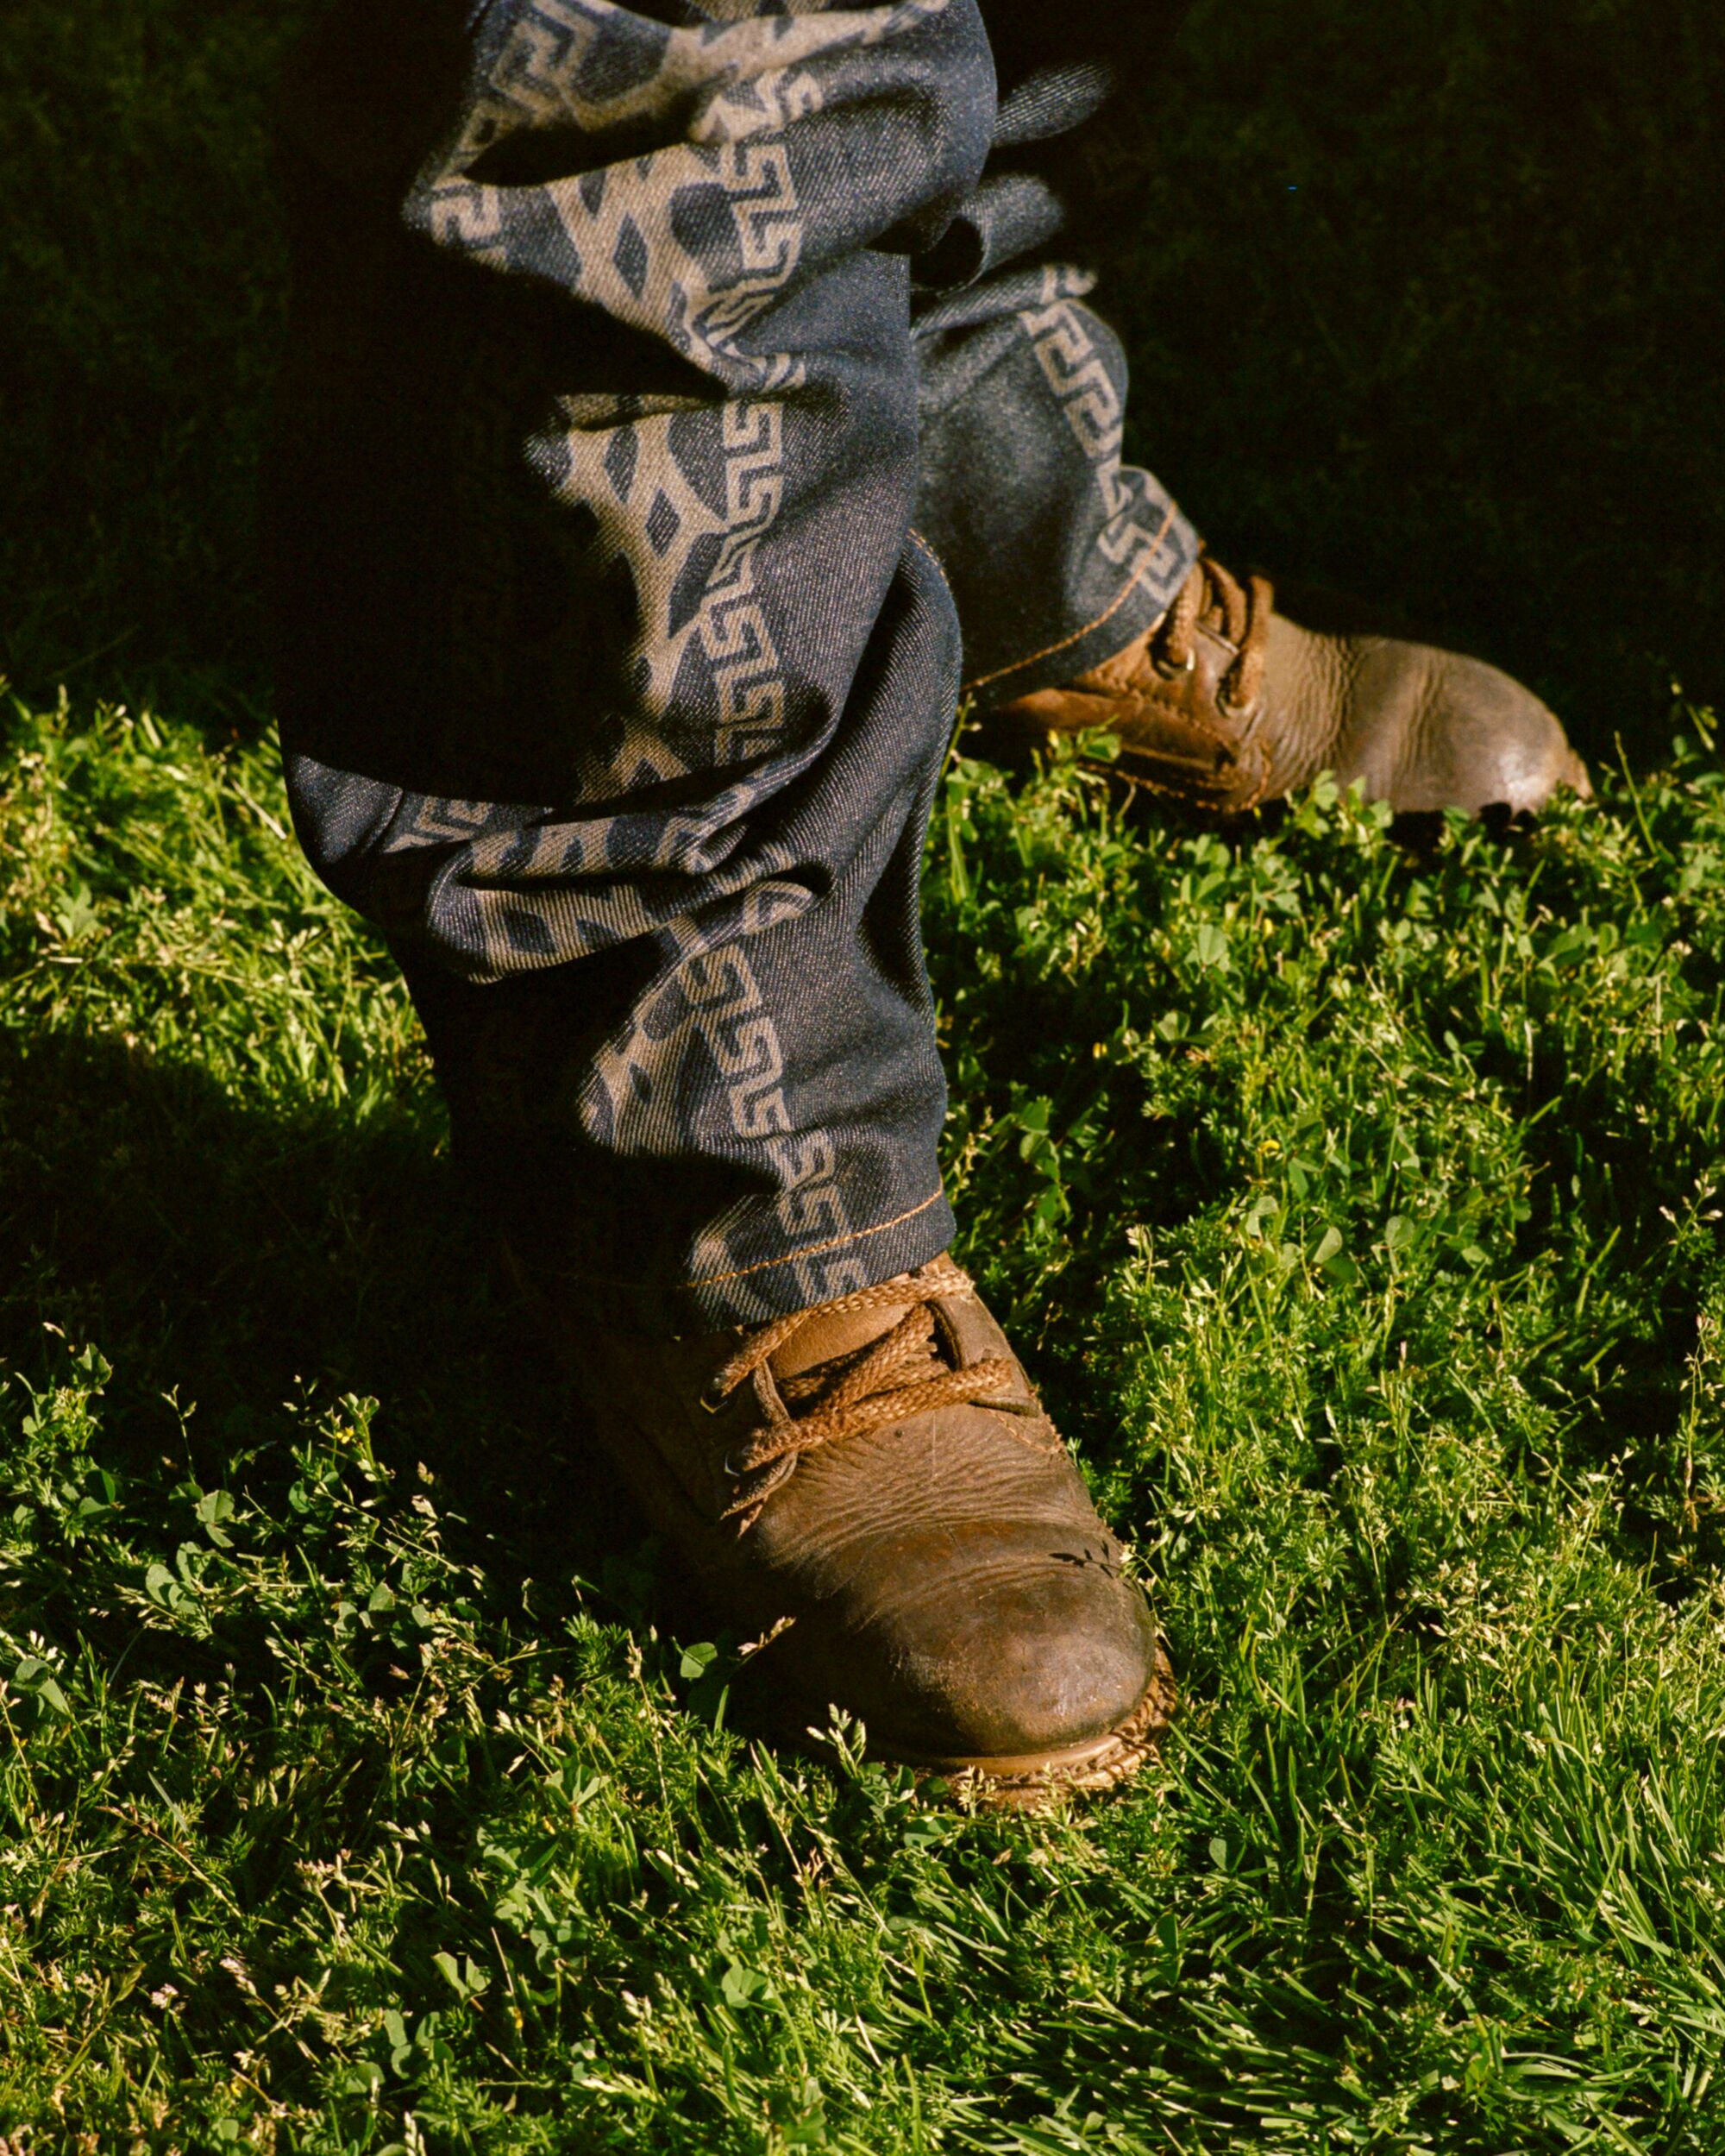 Denim jeans and boots on grass.